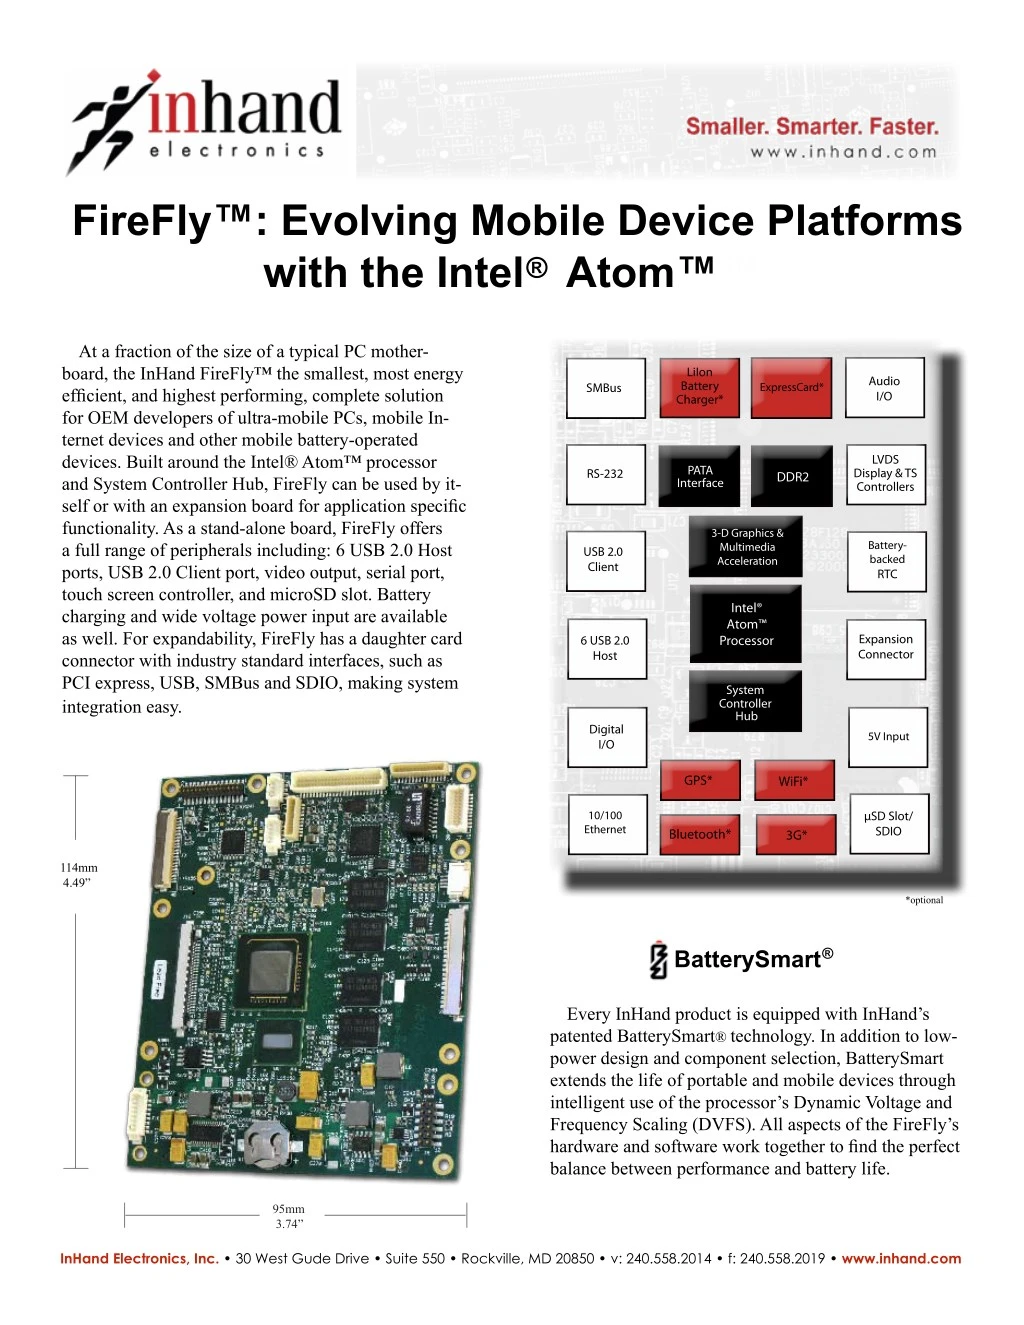 firefly evolving mobile device platforms with